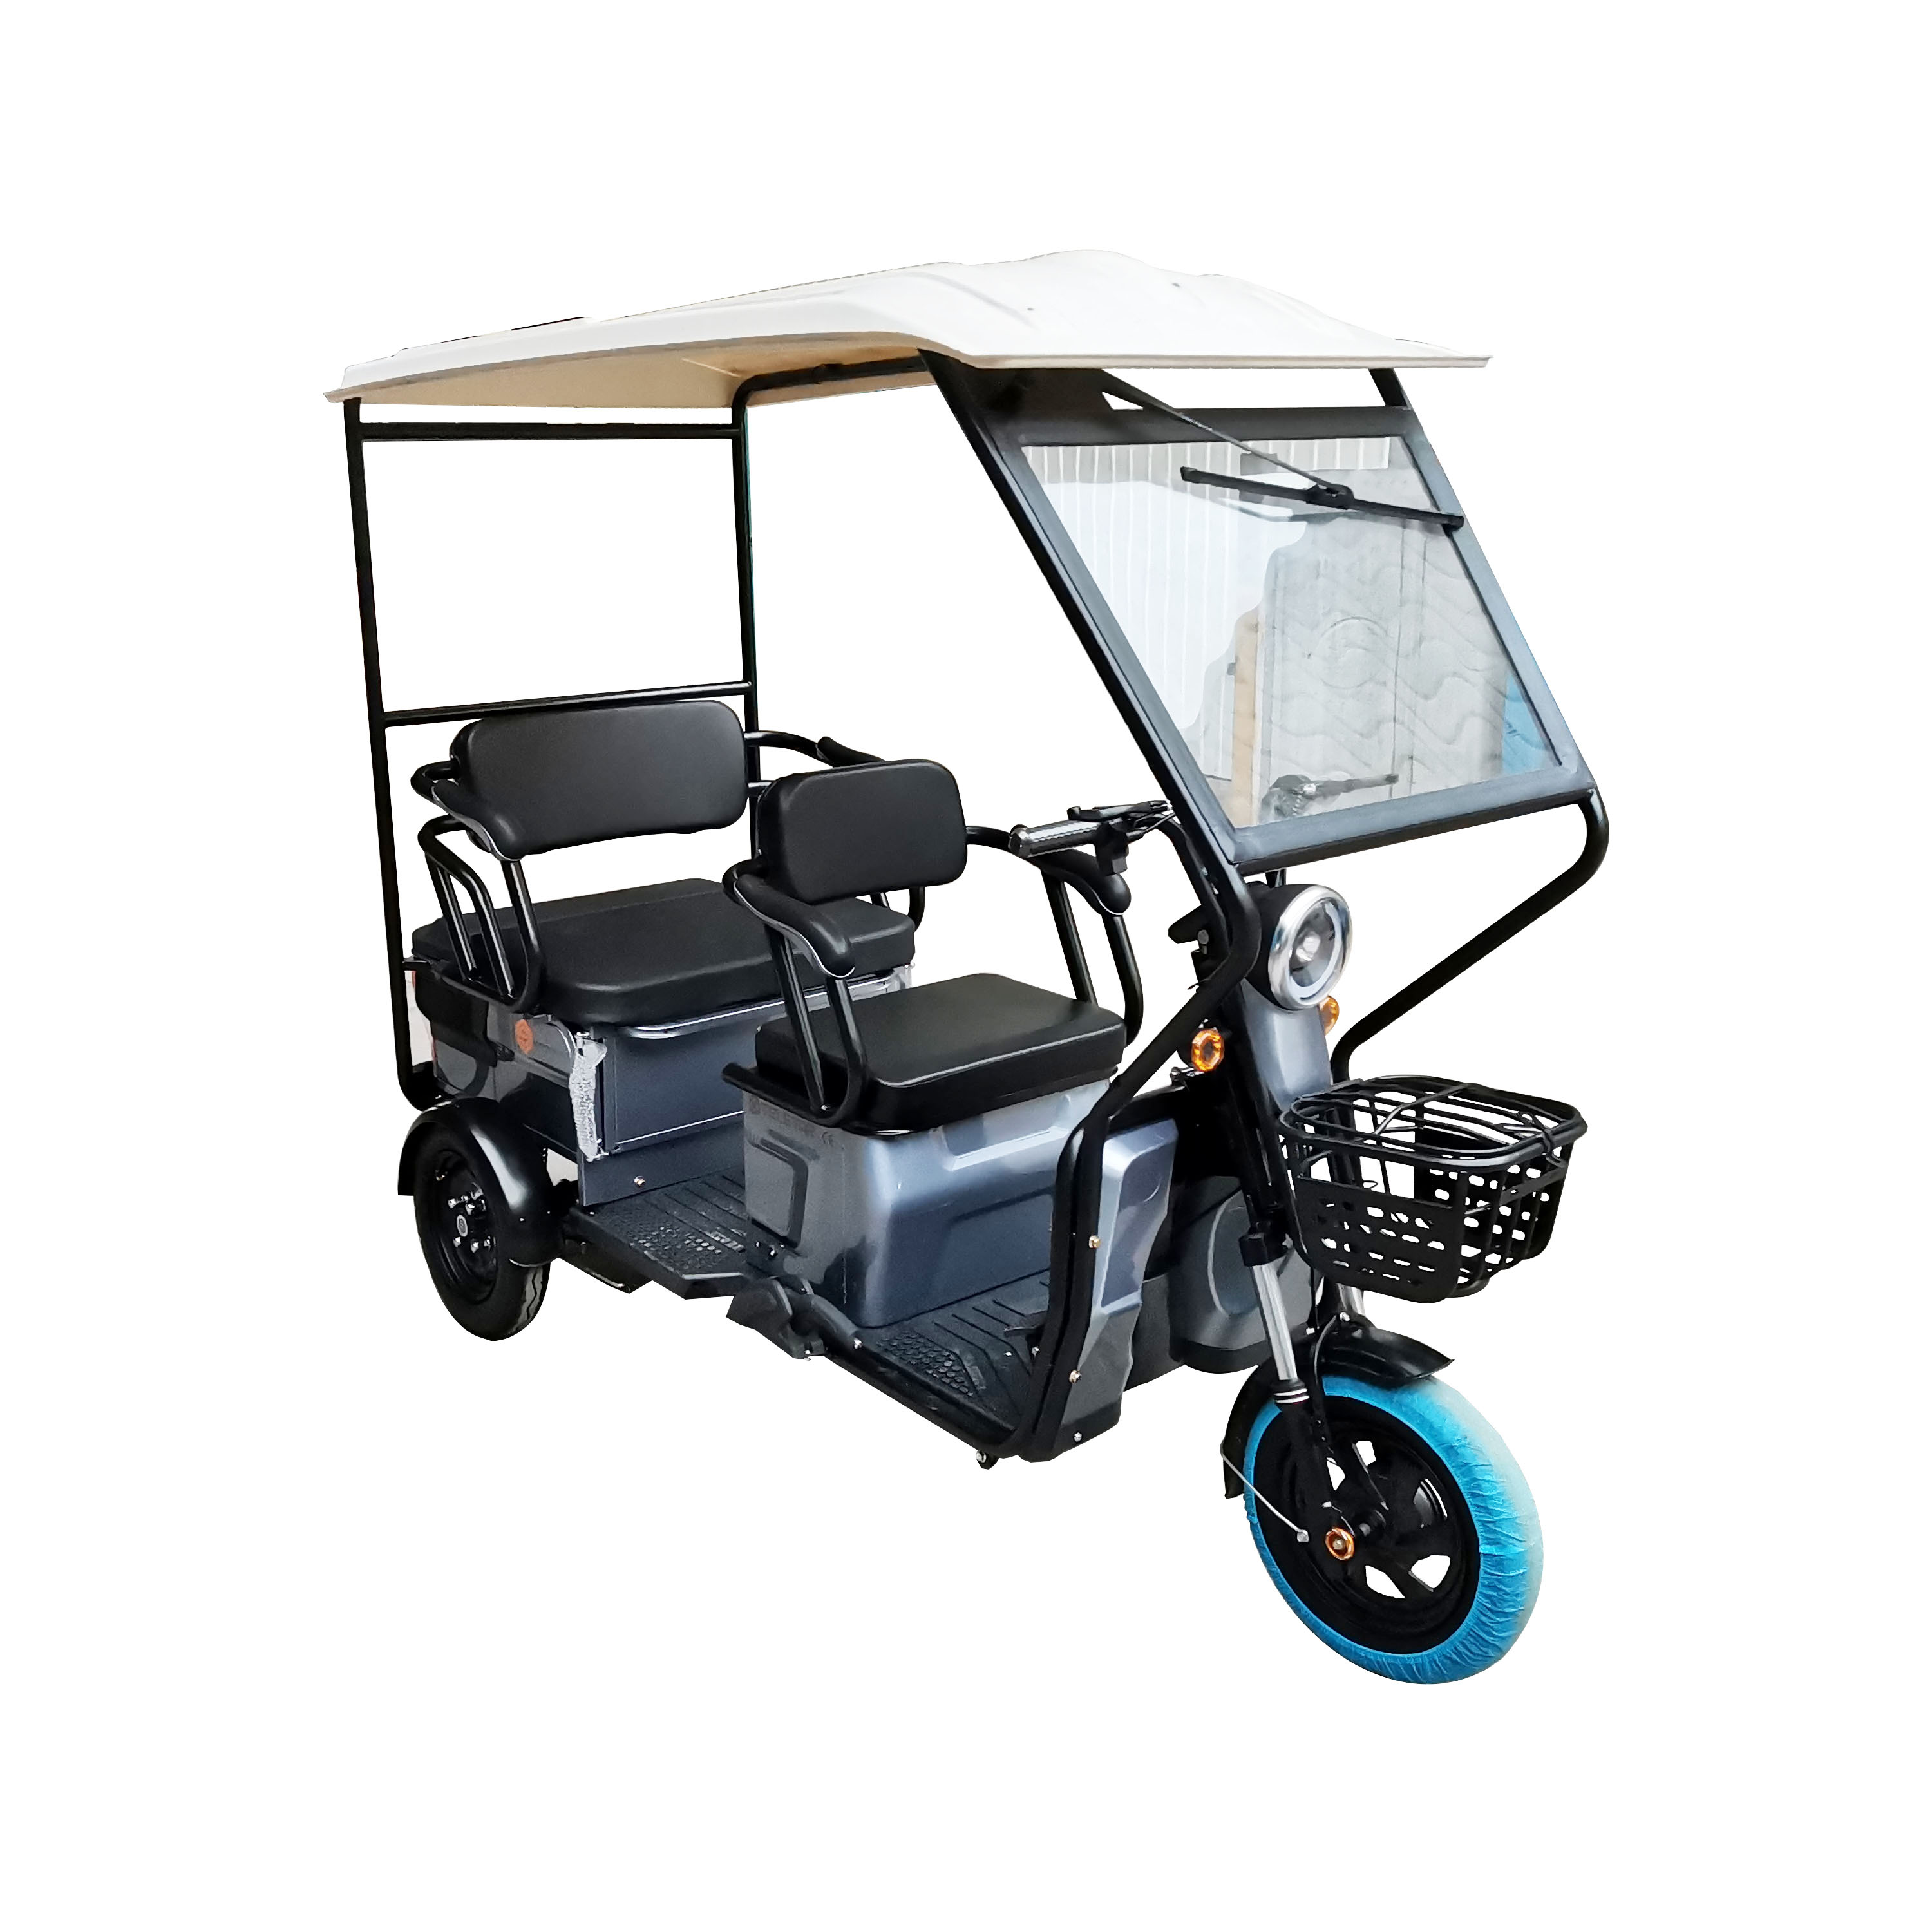 Small Size E Rickshaw Three-Wheelded Mobility Scooter With Seat for 3 People 3-Wheel 3 Passenger Scooter